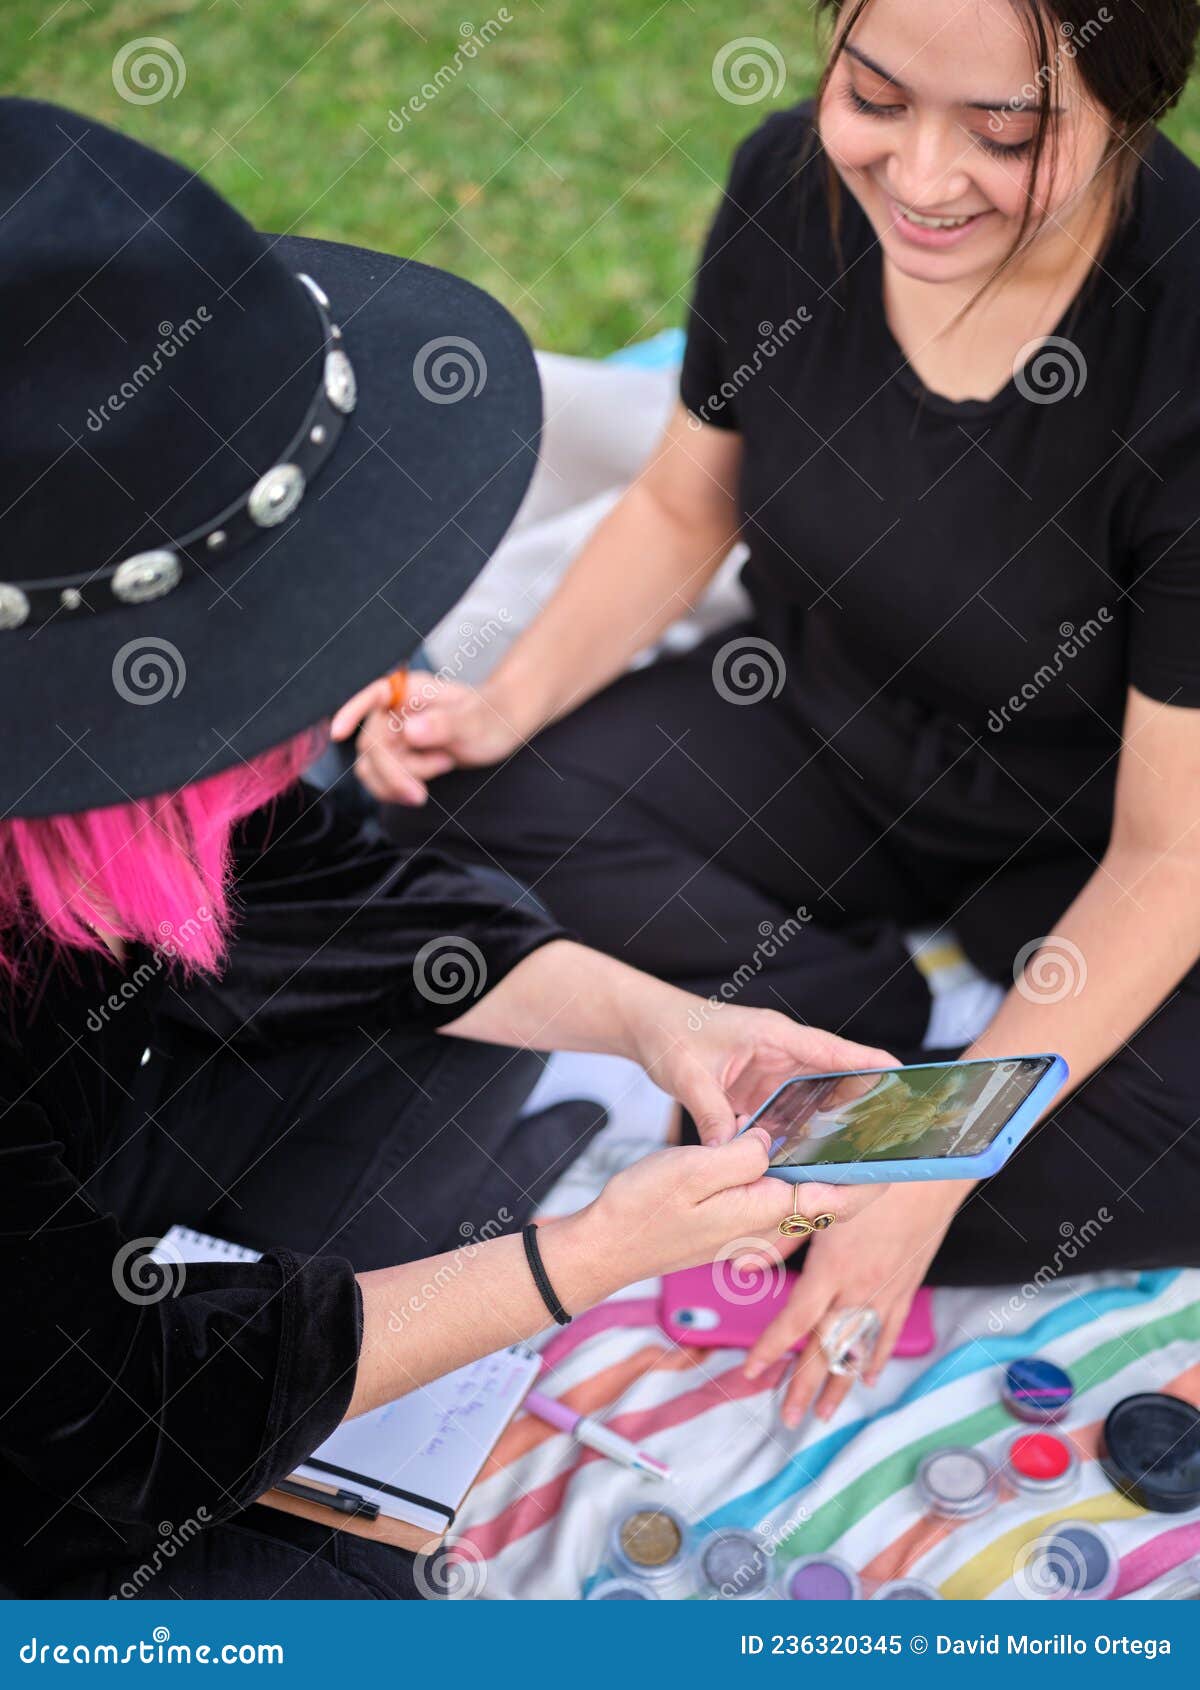 two young women looking at a  to characterize on the phone